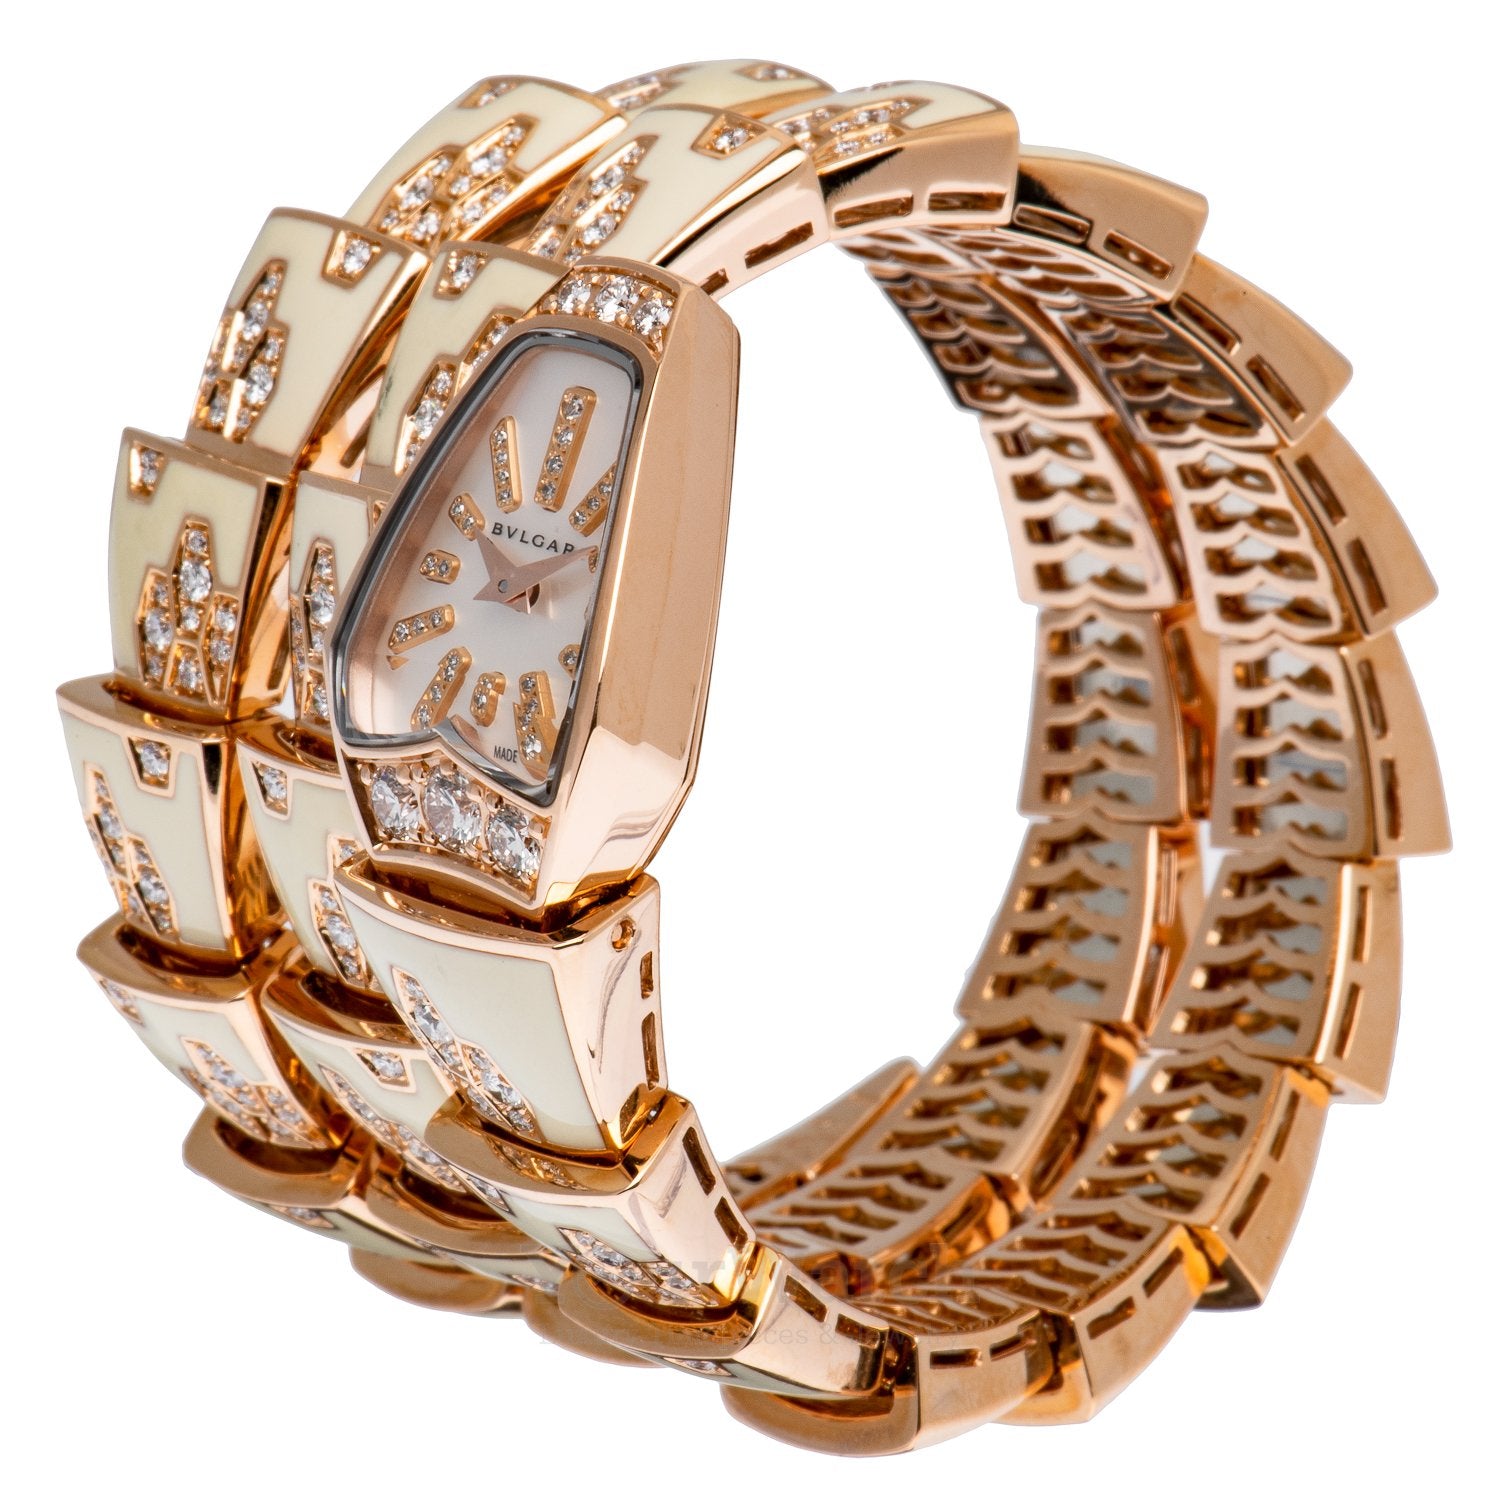 Bvlgari Serpenti Spiga – 103252 – 82,060 USD – The Watch Pages